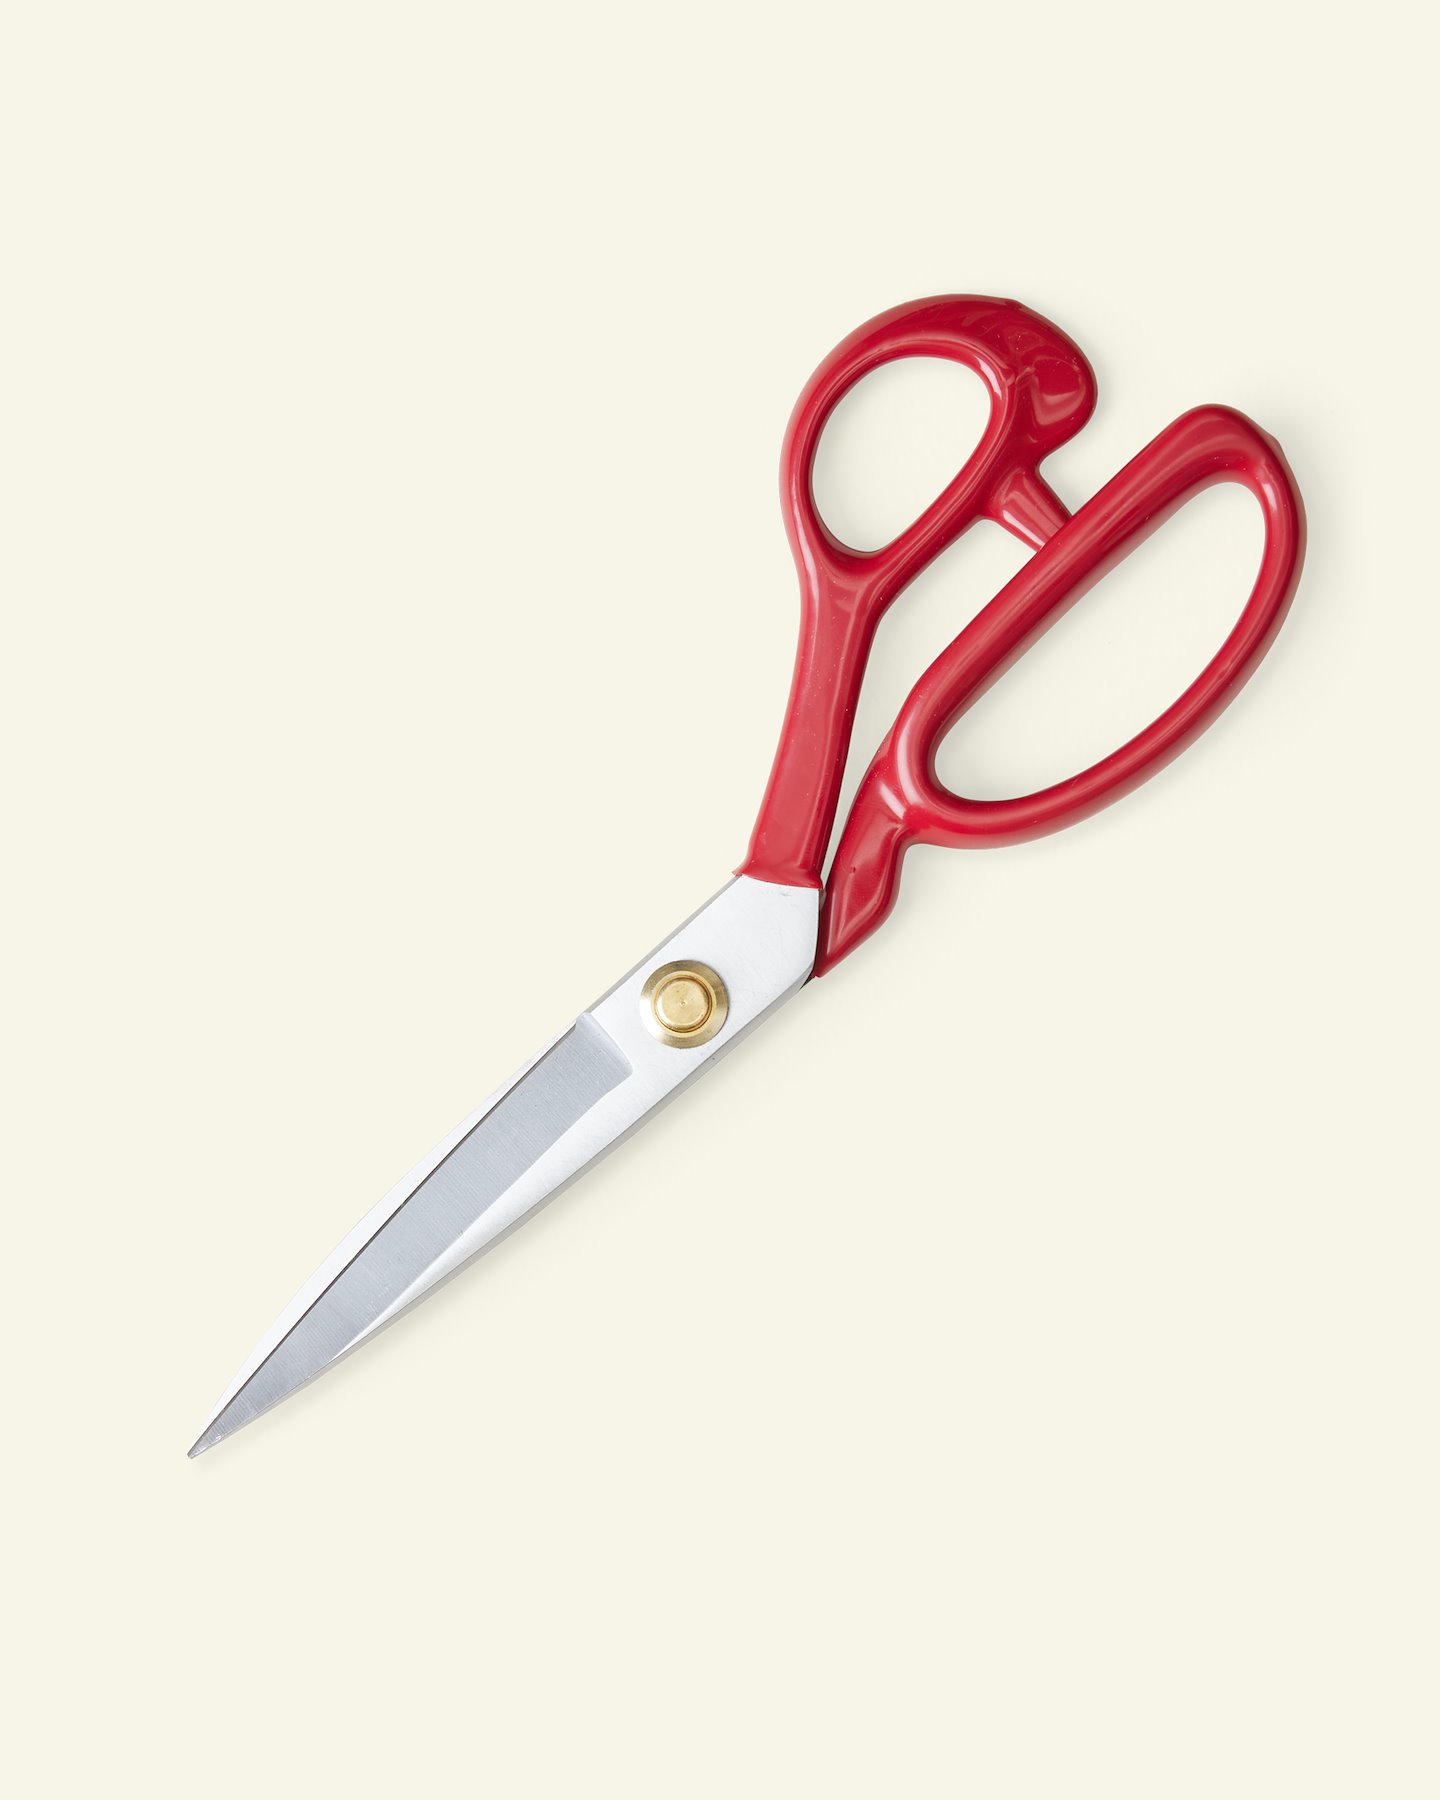 Pocket Scissors 4.5 Sharp/blunt Tips Curved Blades for Thread, Yarn,  Quilting, Delicate Embroidery, Applique, Needlework, Felt Cutting Tool -   Denmark